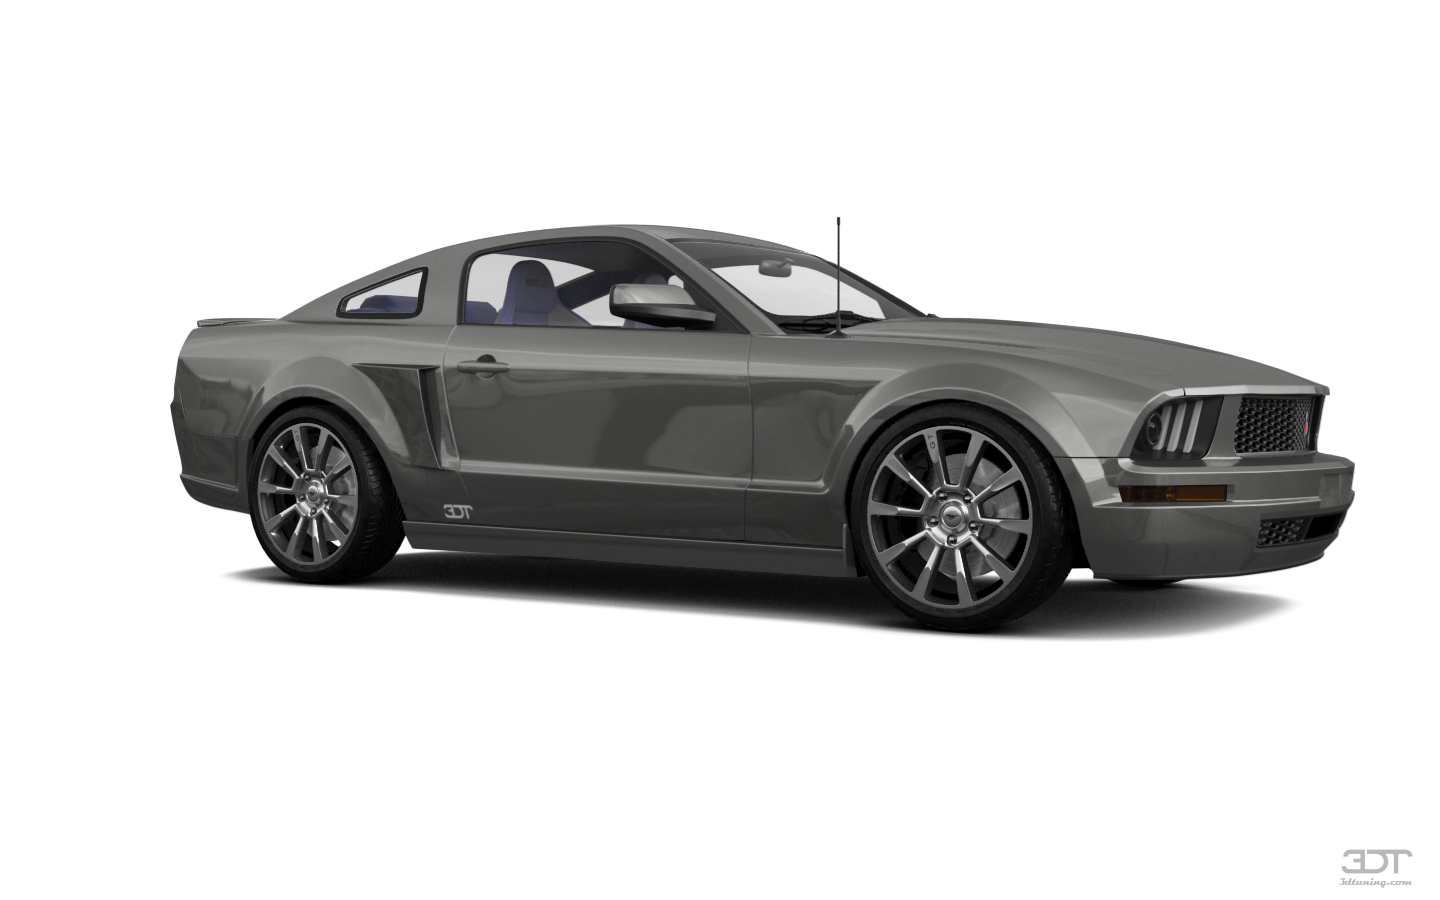 Ford Mustang 2 Door Coupe 2006